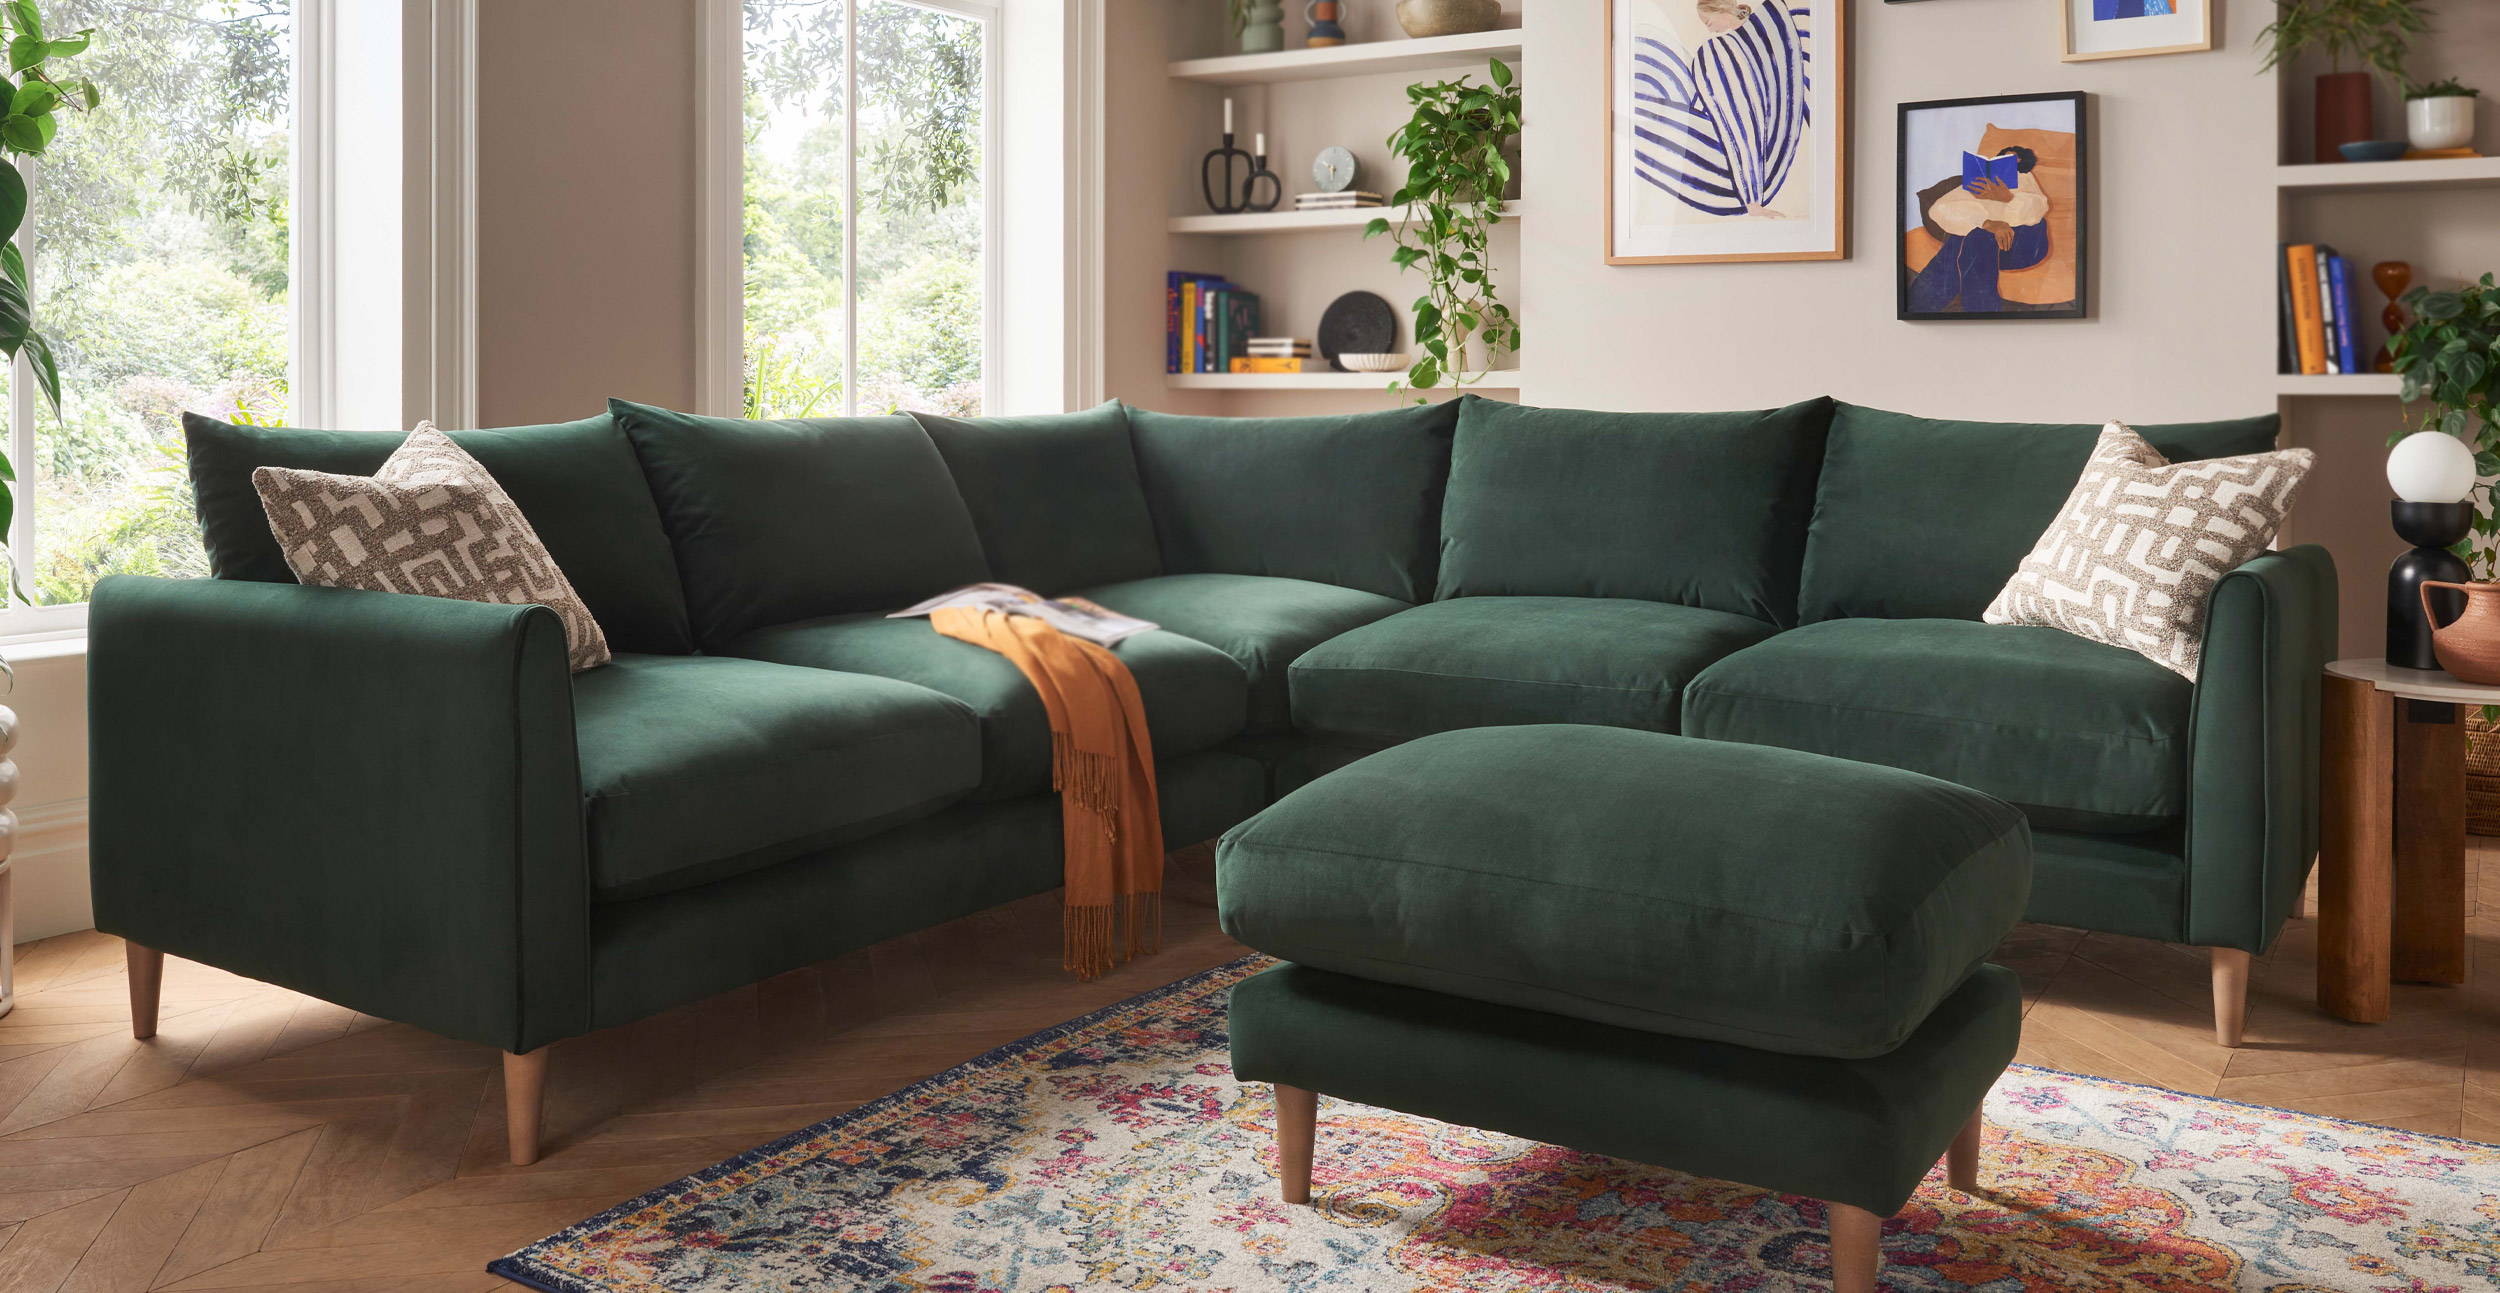 Shop The Kit Sofa Collection Online - Made In The UK